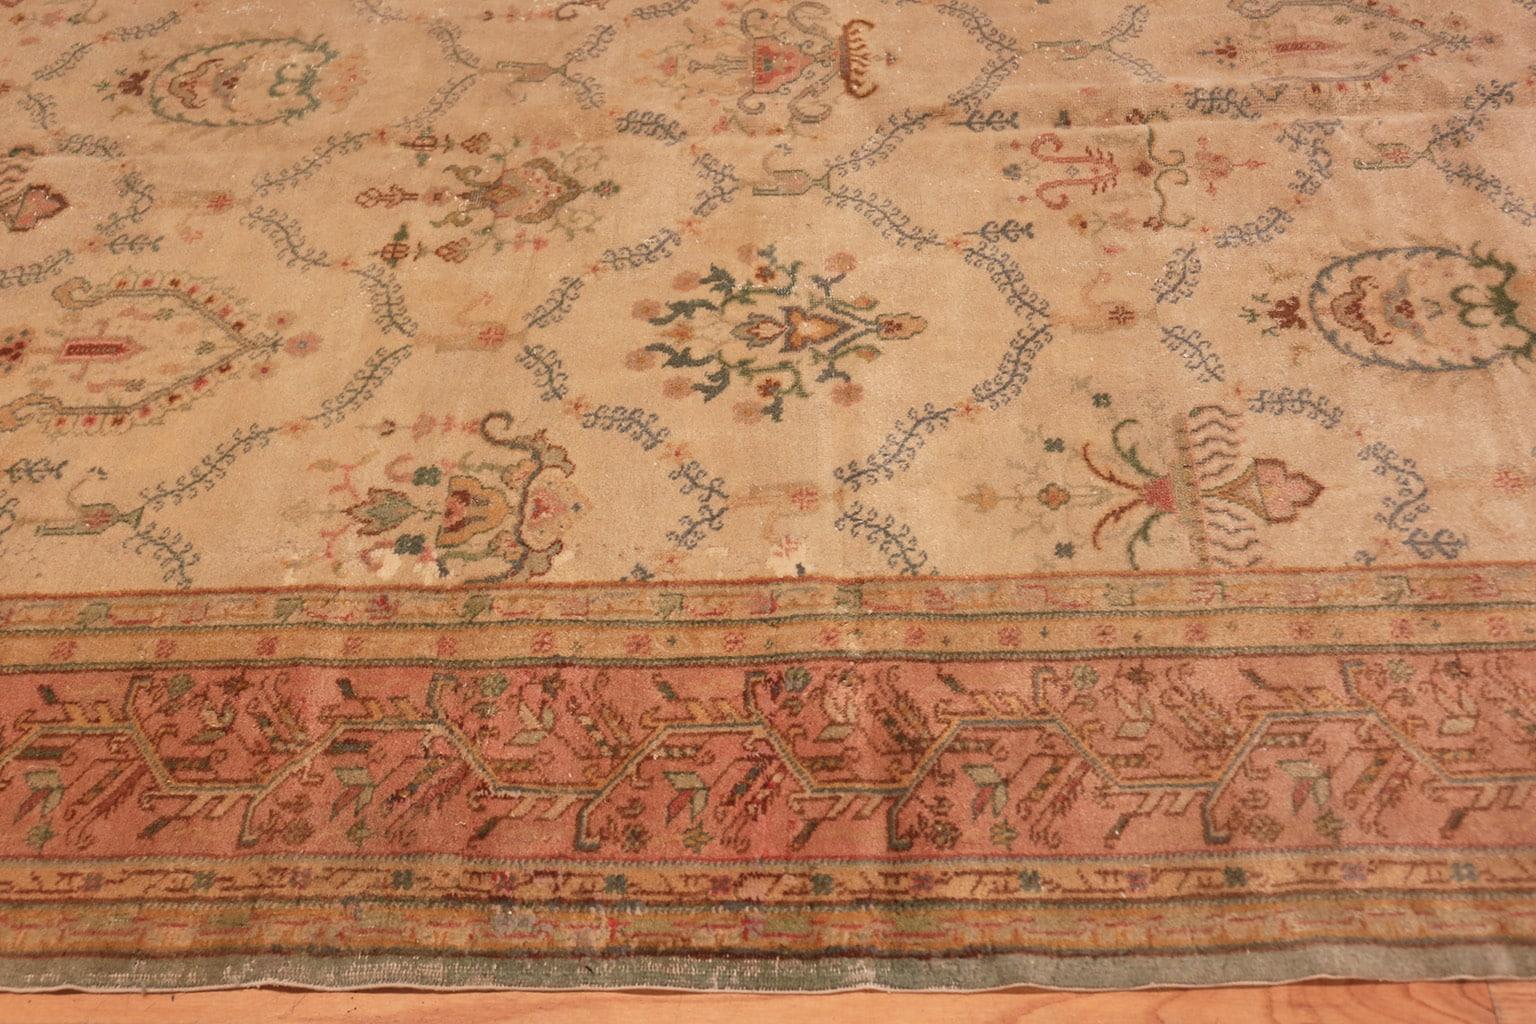 Vintage Sivas carpet, origin: Turkey, circa mid-20th century - Size: 11 ft 9 in x 17 ft 3 in (3.58 m x 5.26 m). 

A rich, grapefruit pink border surrounds the Sivas carpet, its interior containing a pleasantly curling vine that establishes an almost